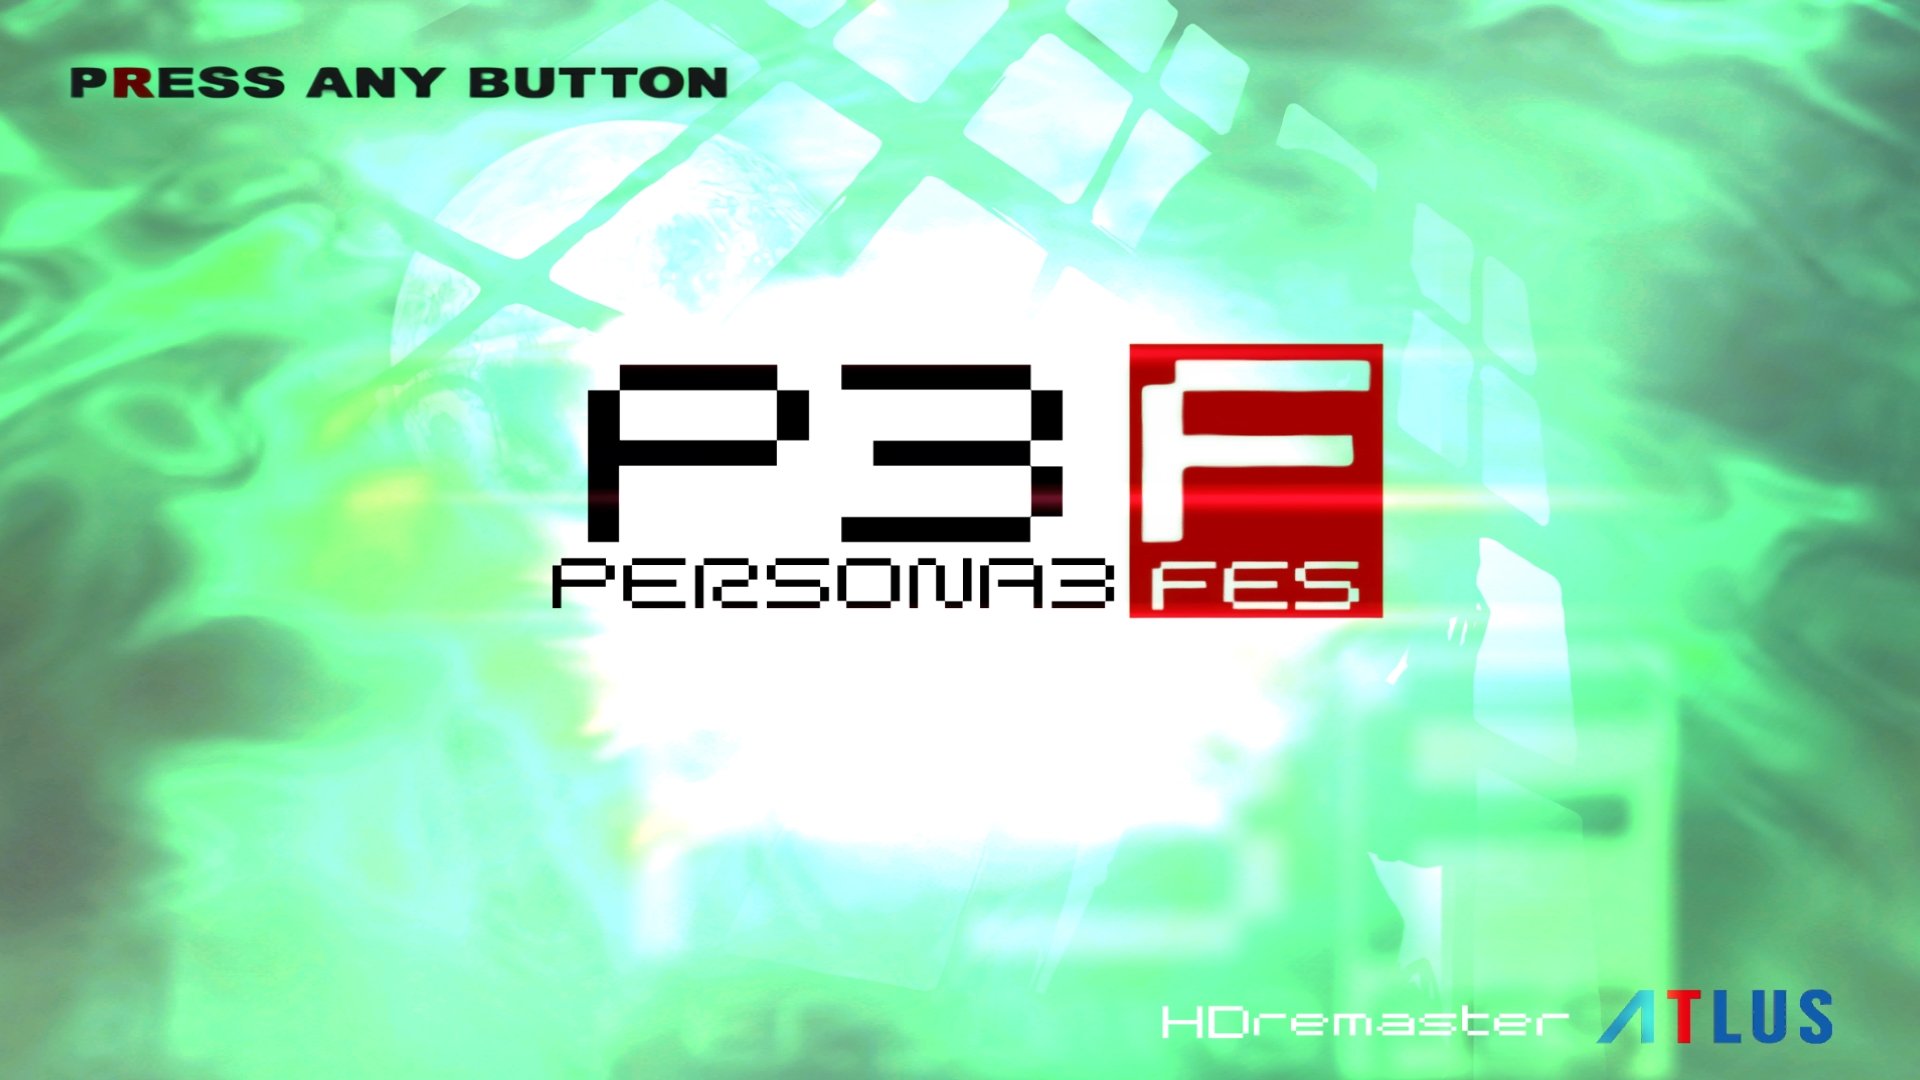 Tutorial) Playing a Modded ISO on PS2 [Persona 3 FES] [Tutorials]